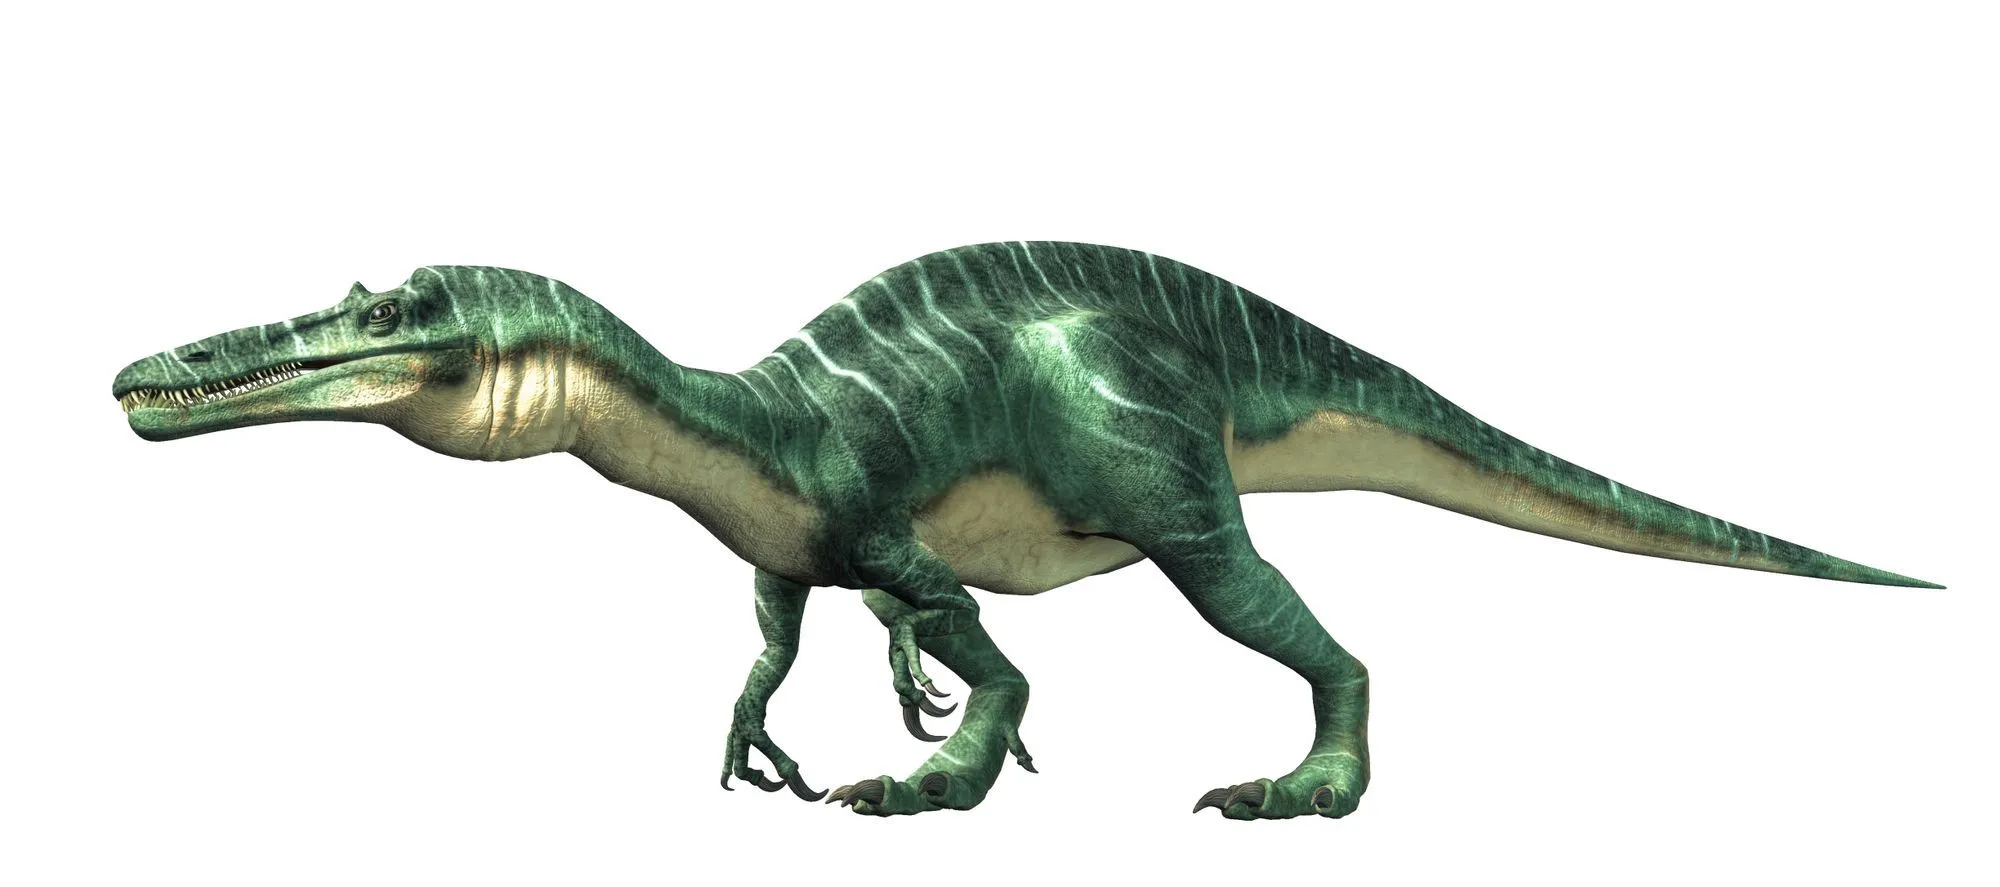 Suchomimus facts are about a dinosaur that lived 125-112 million years ago.